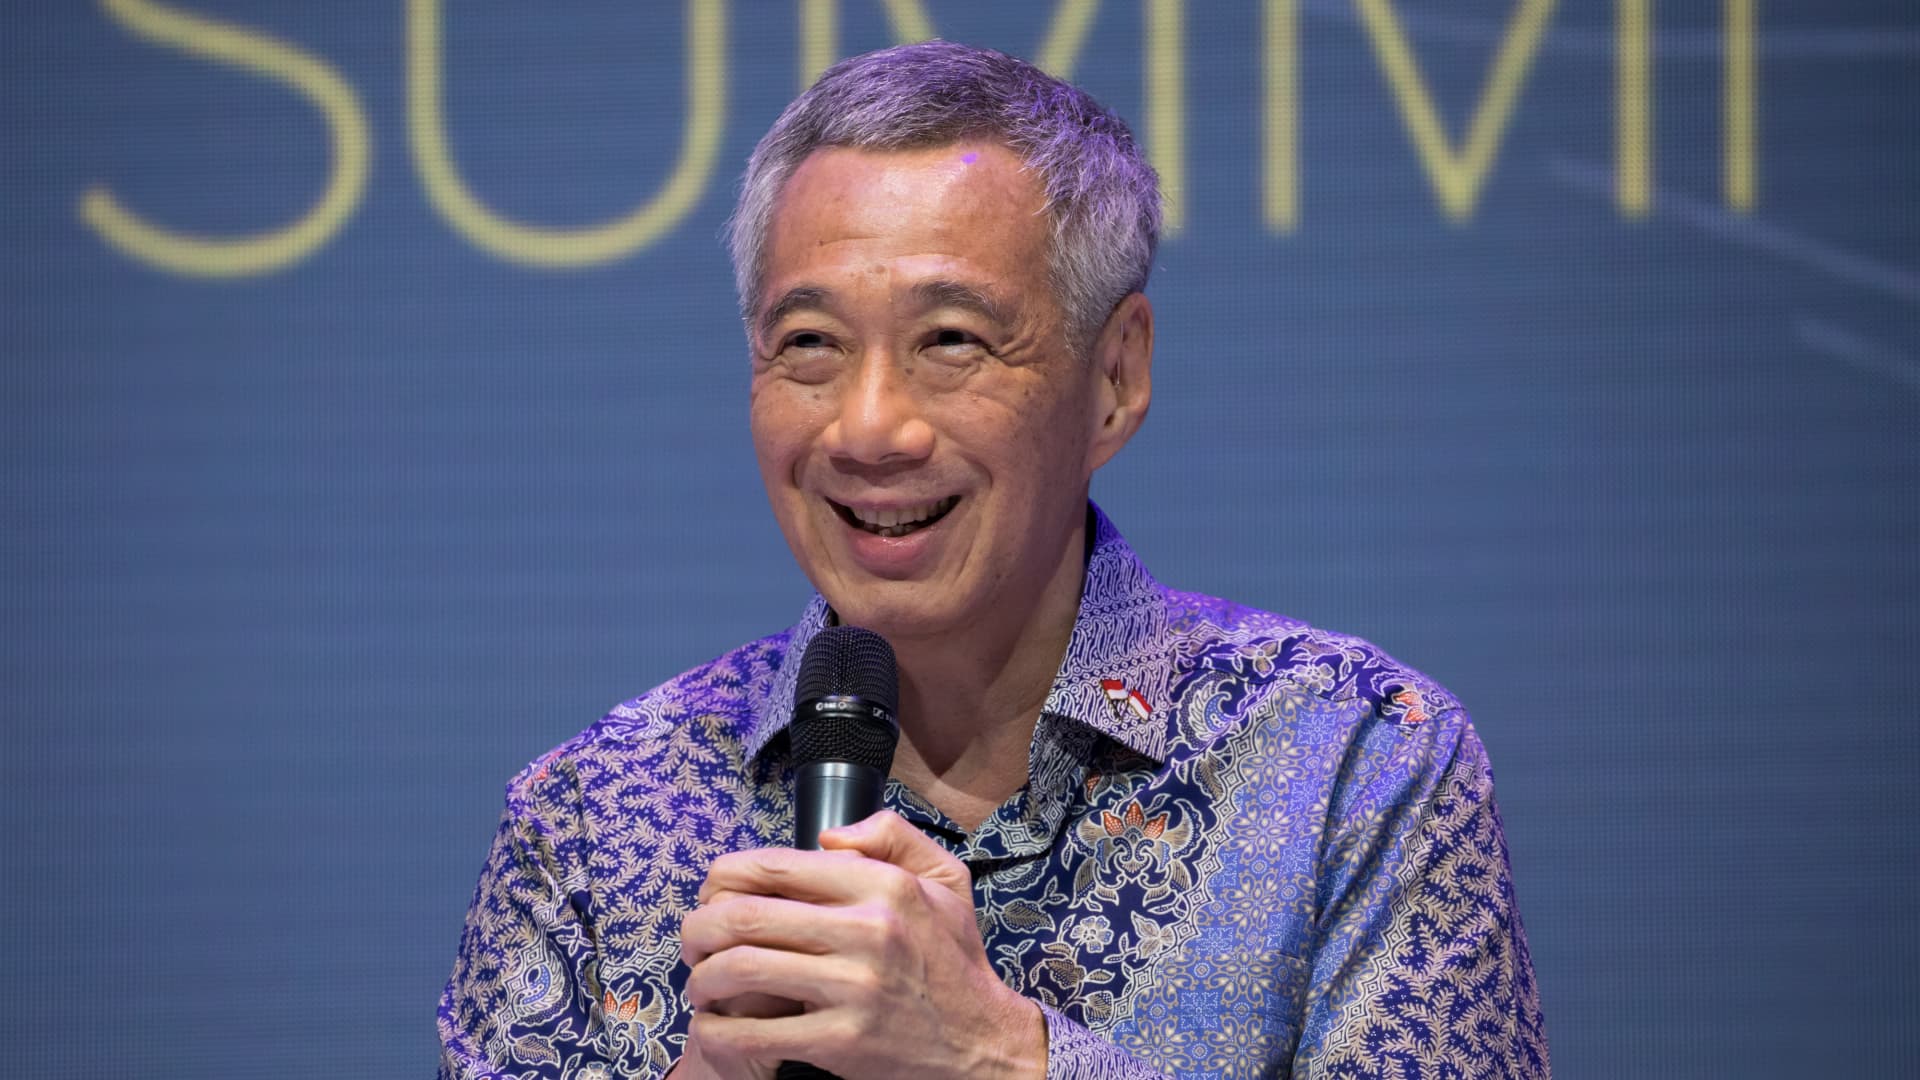 Singapore Prime Minister Lee Hsien Loong assessments optimistic for Covid